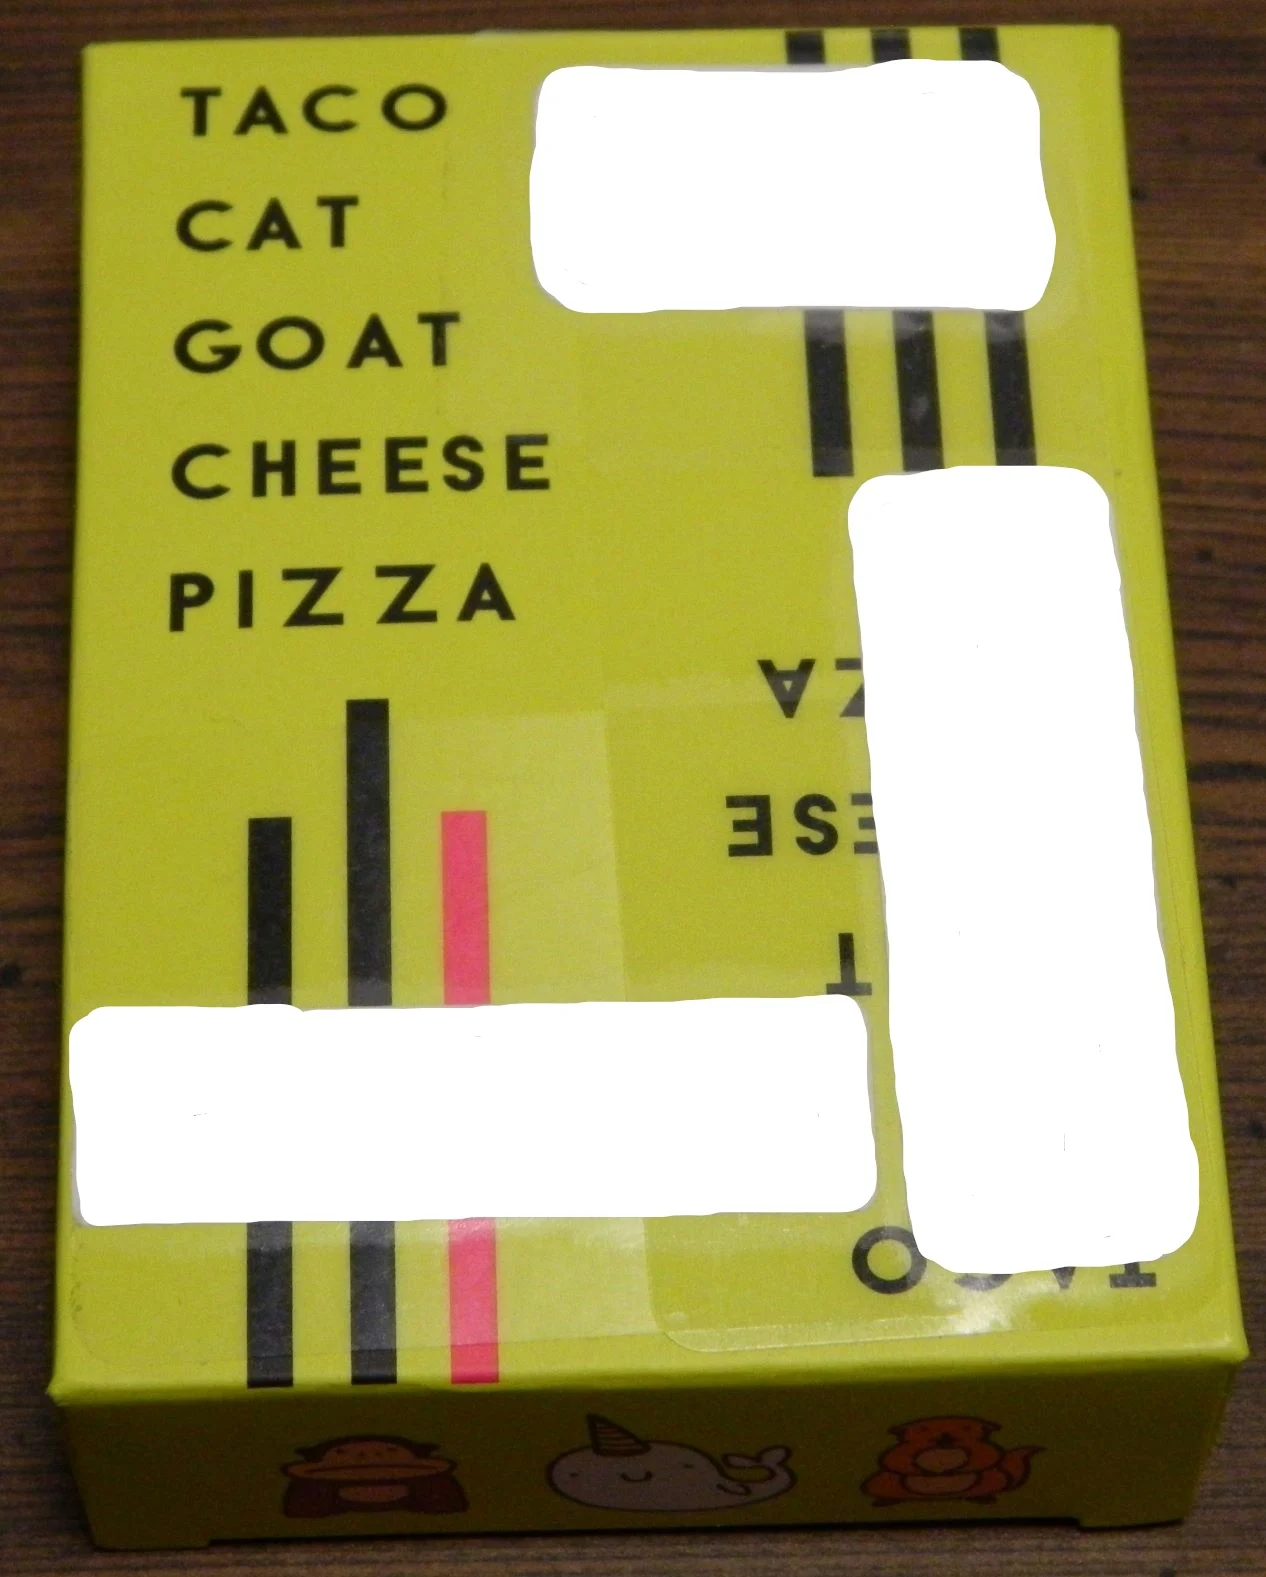 Box for Taco Cat Goat Cheese Pizza